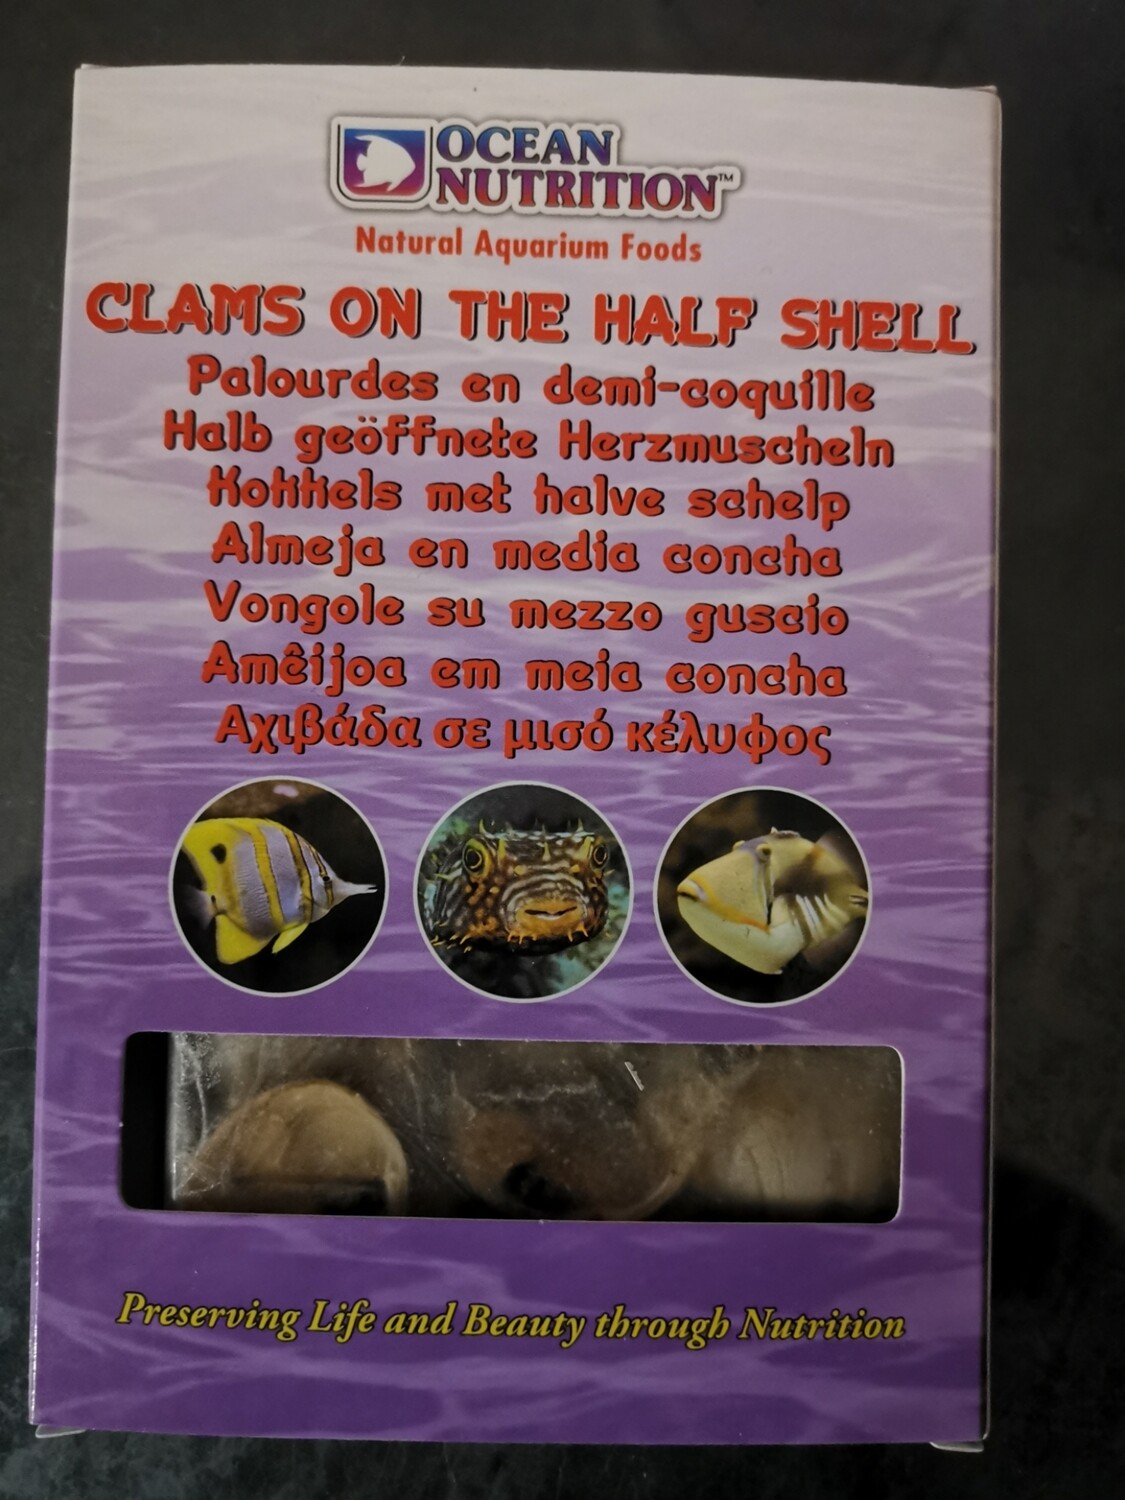 Clams on the half shell